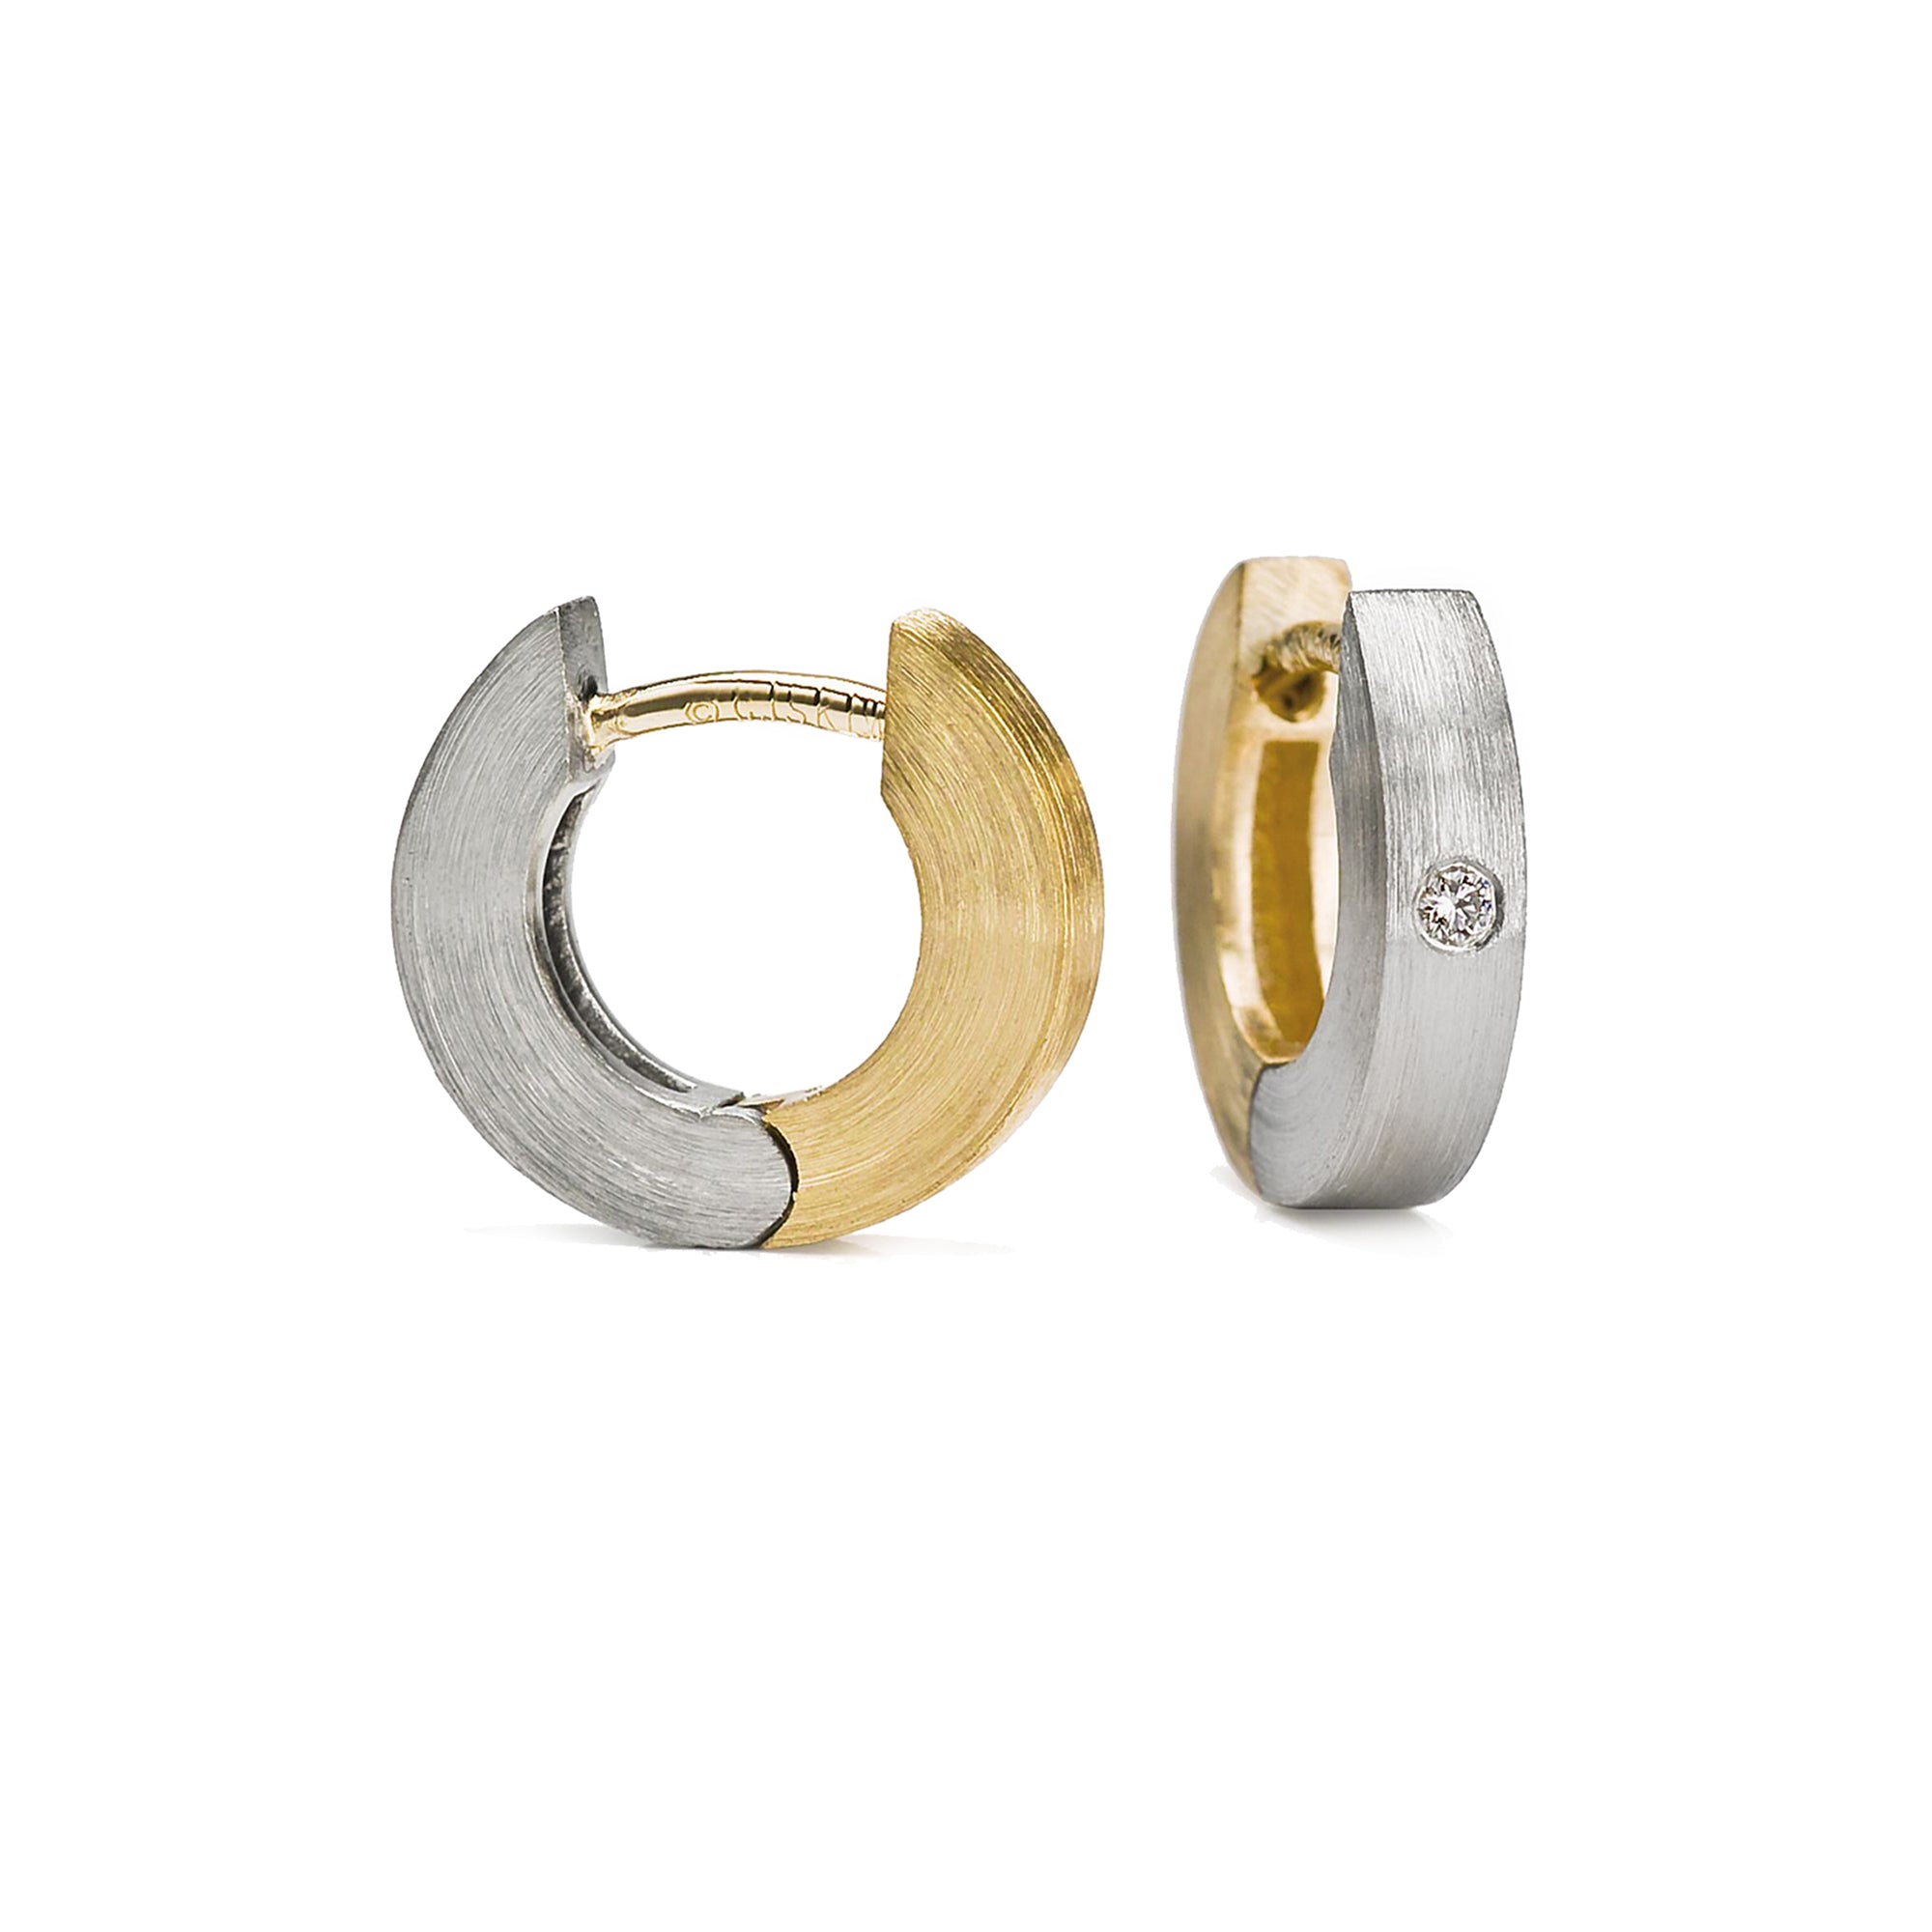 These flat profile hinged hoops earrings are 18k yellow gold and palladium with small diamonds burnish set in the palladium. 